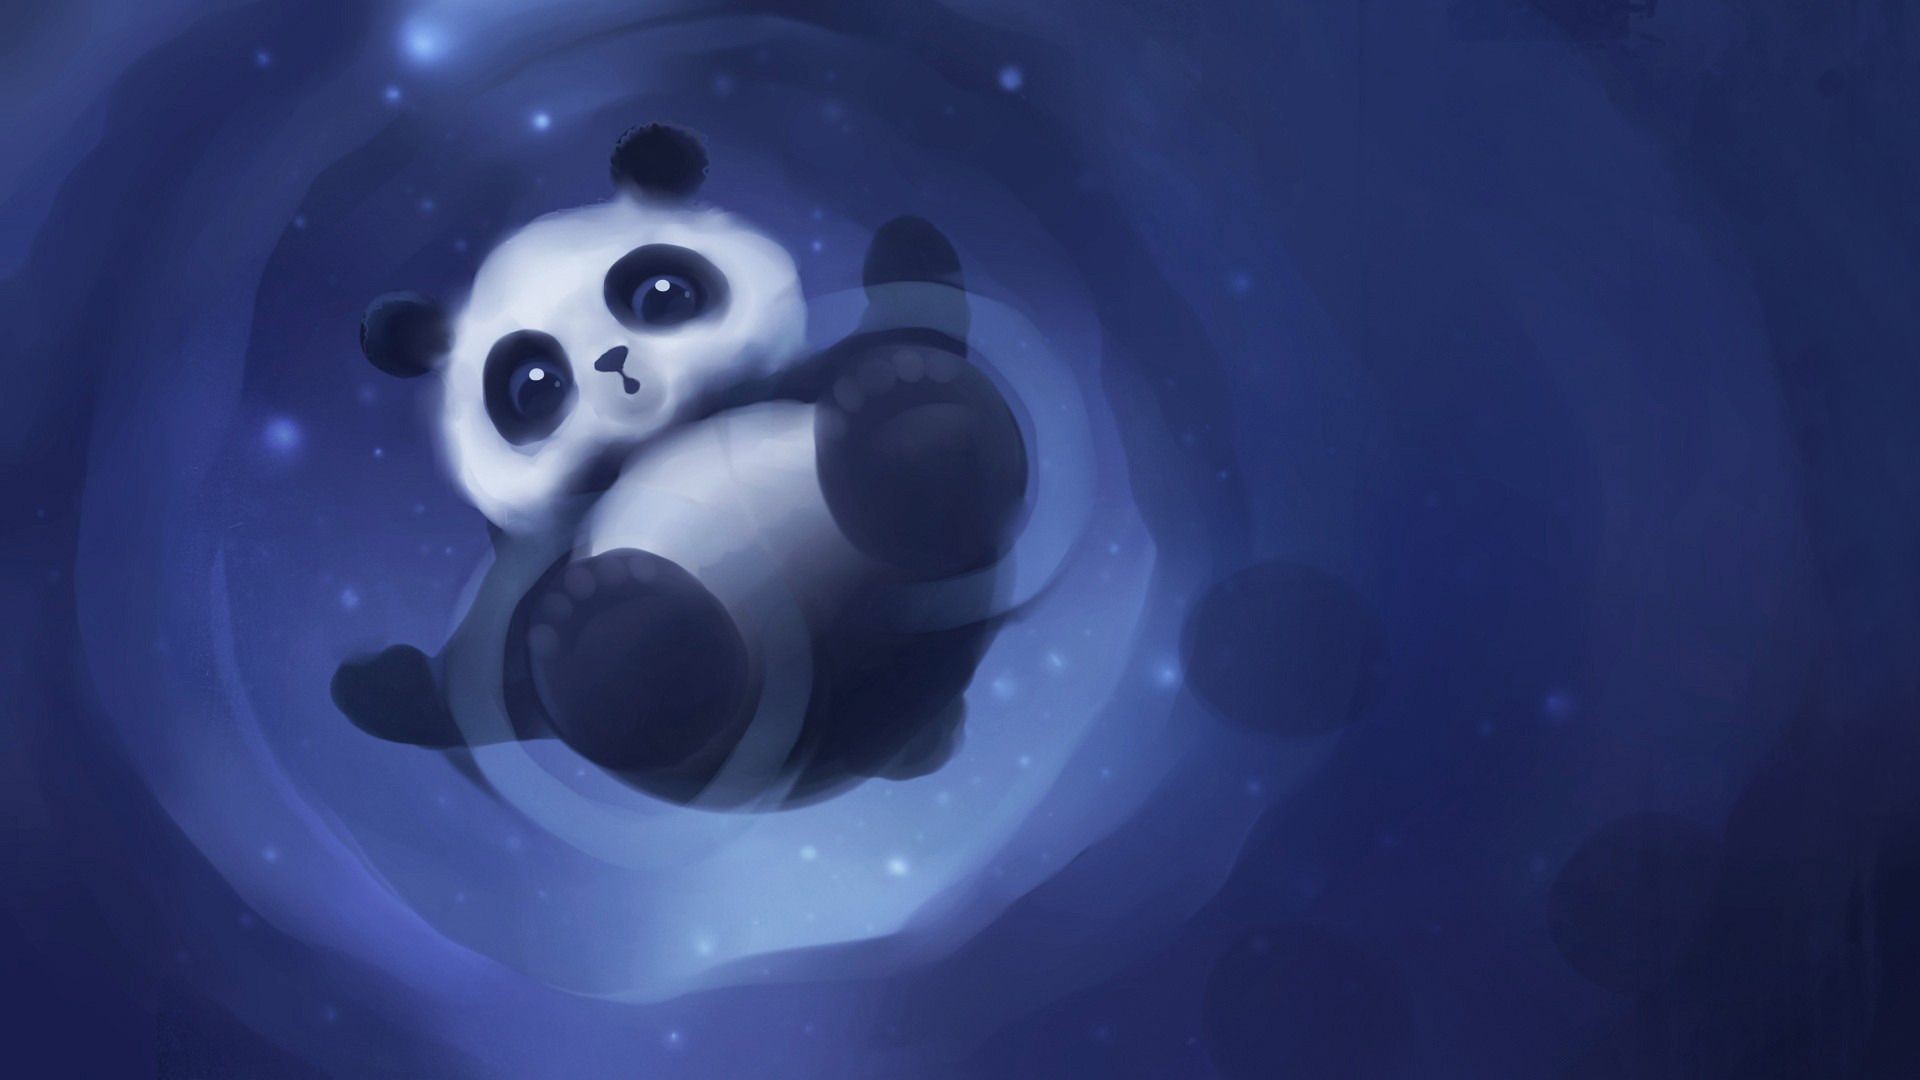 1920x1080 Stunning Cute Panda Pictures for PC & Mac, Laptop, Tablet, Mobile Phone